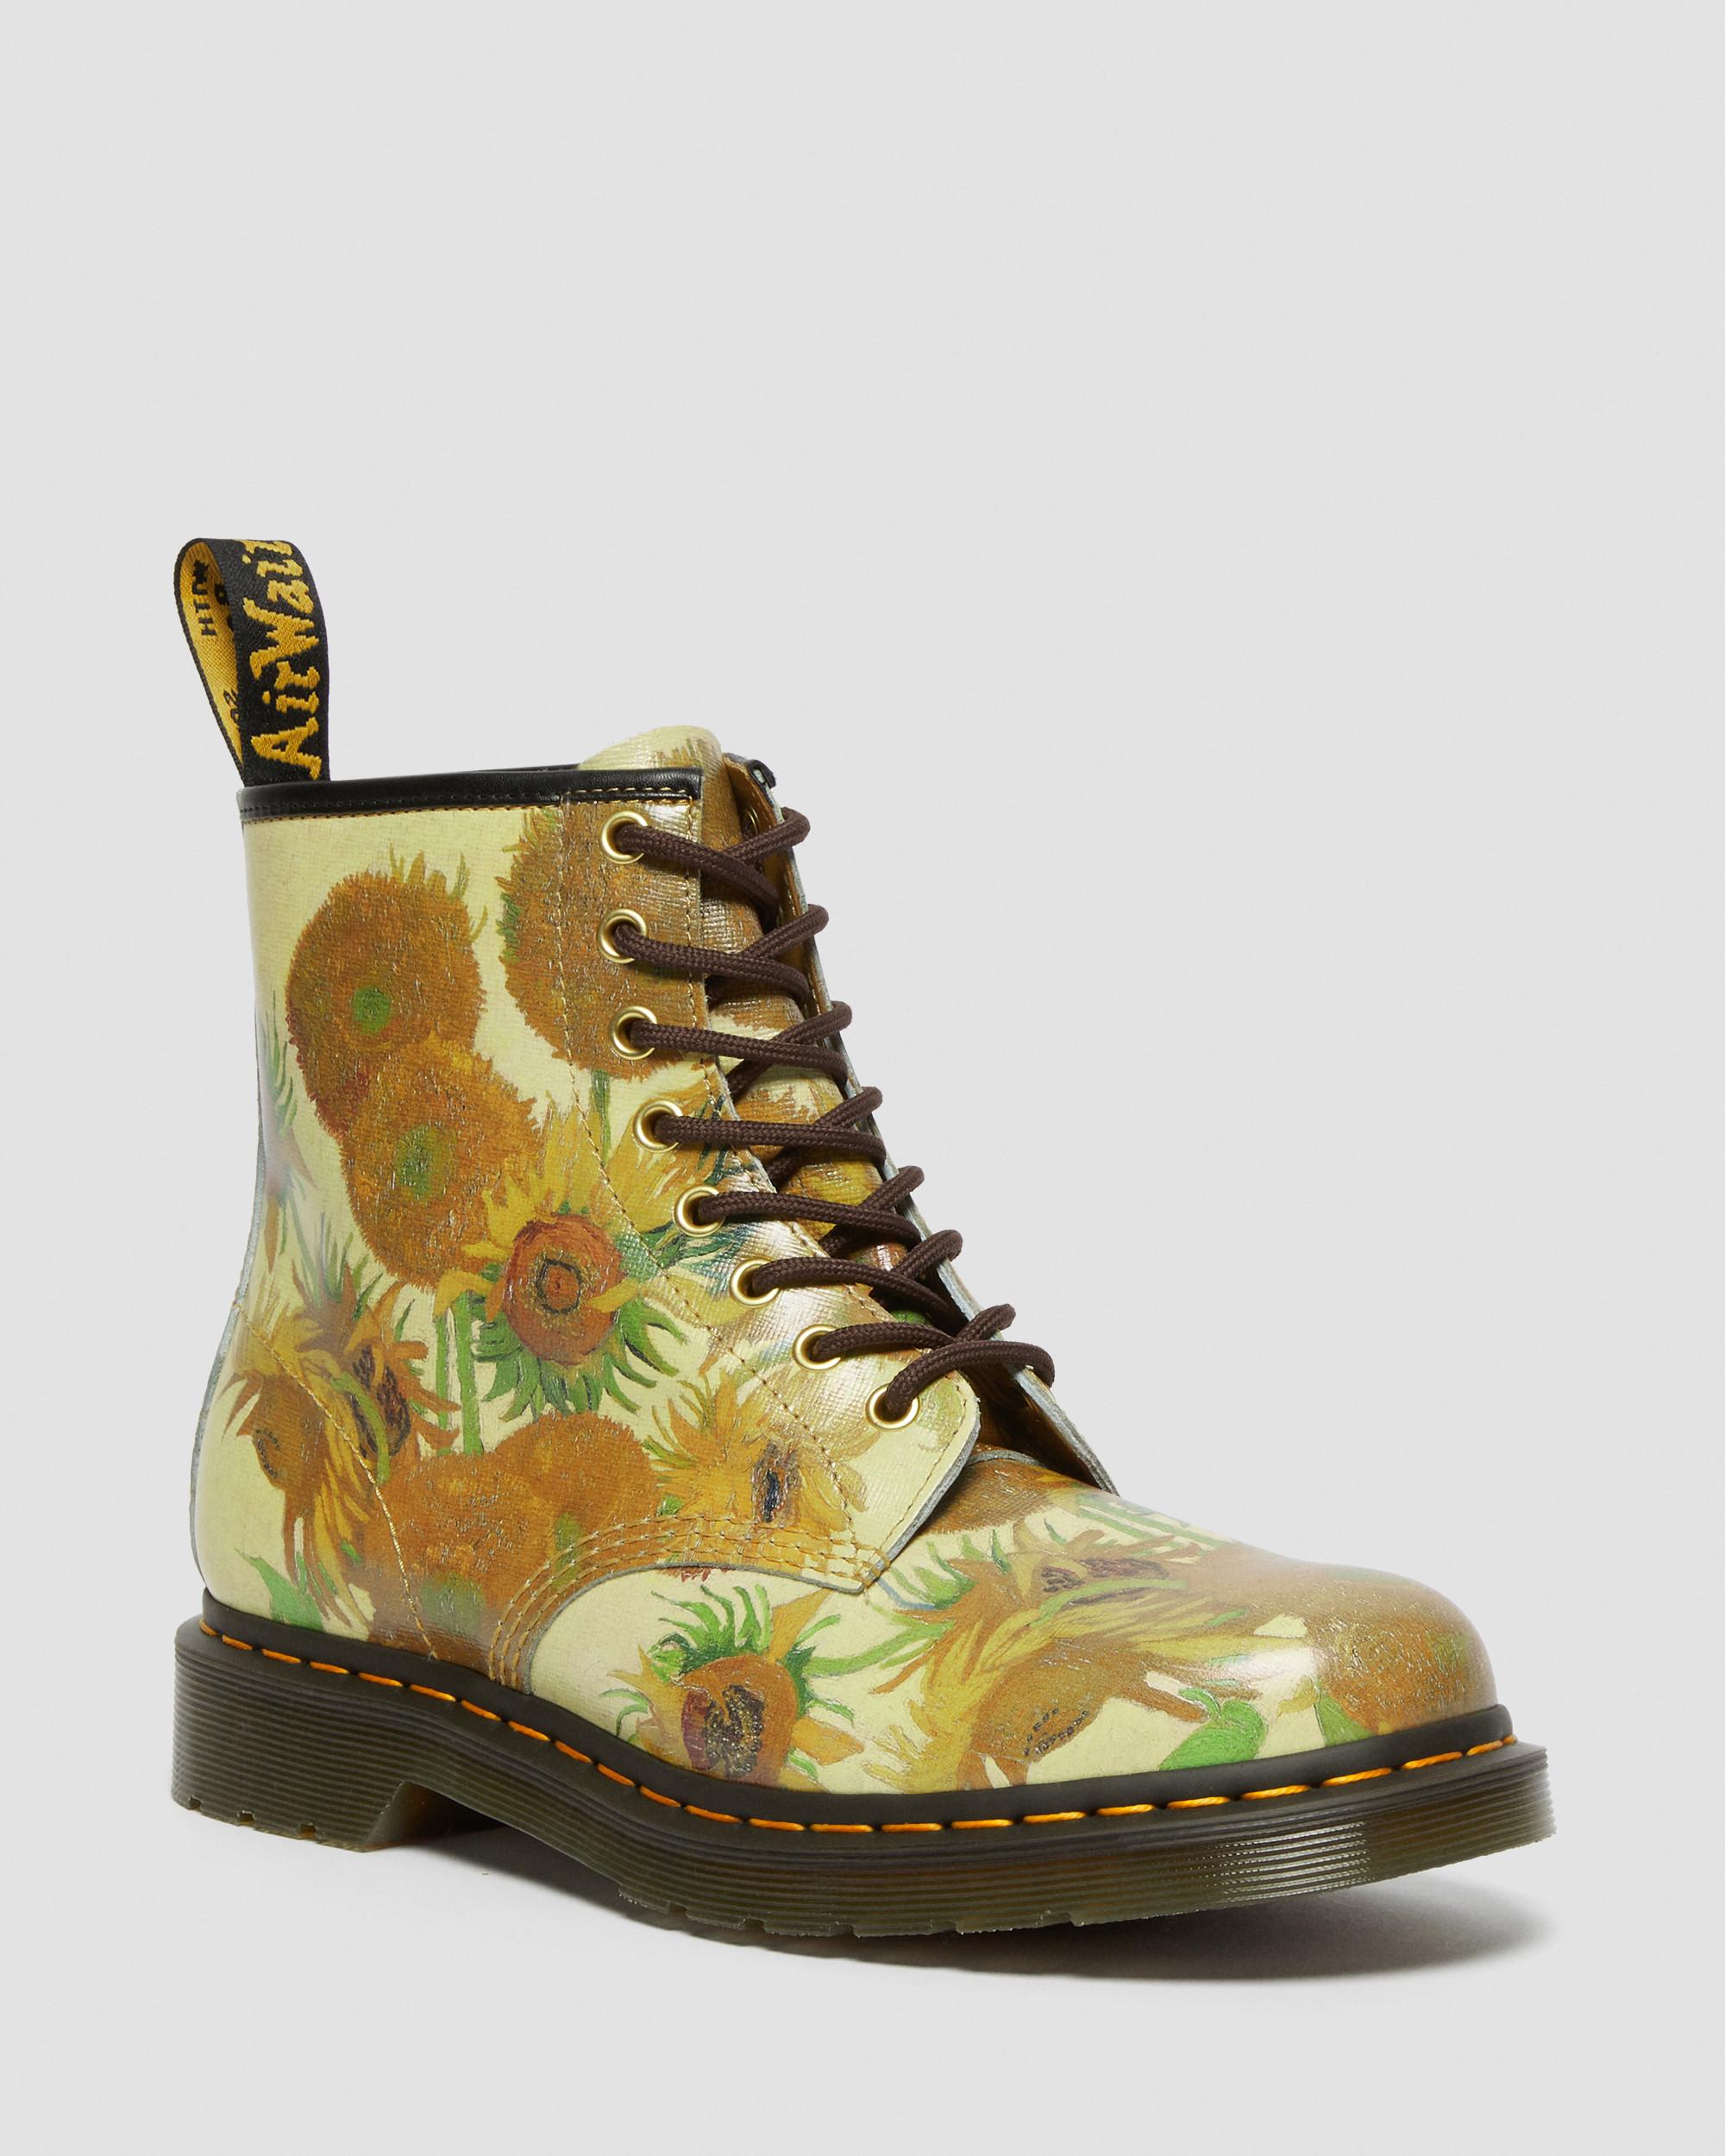 The National Gallery 1460 Sunflowers Leather BootsThe National Gallery 1460 Sunflowers Leather Boots Dr. Martens